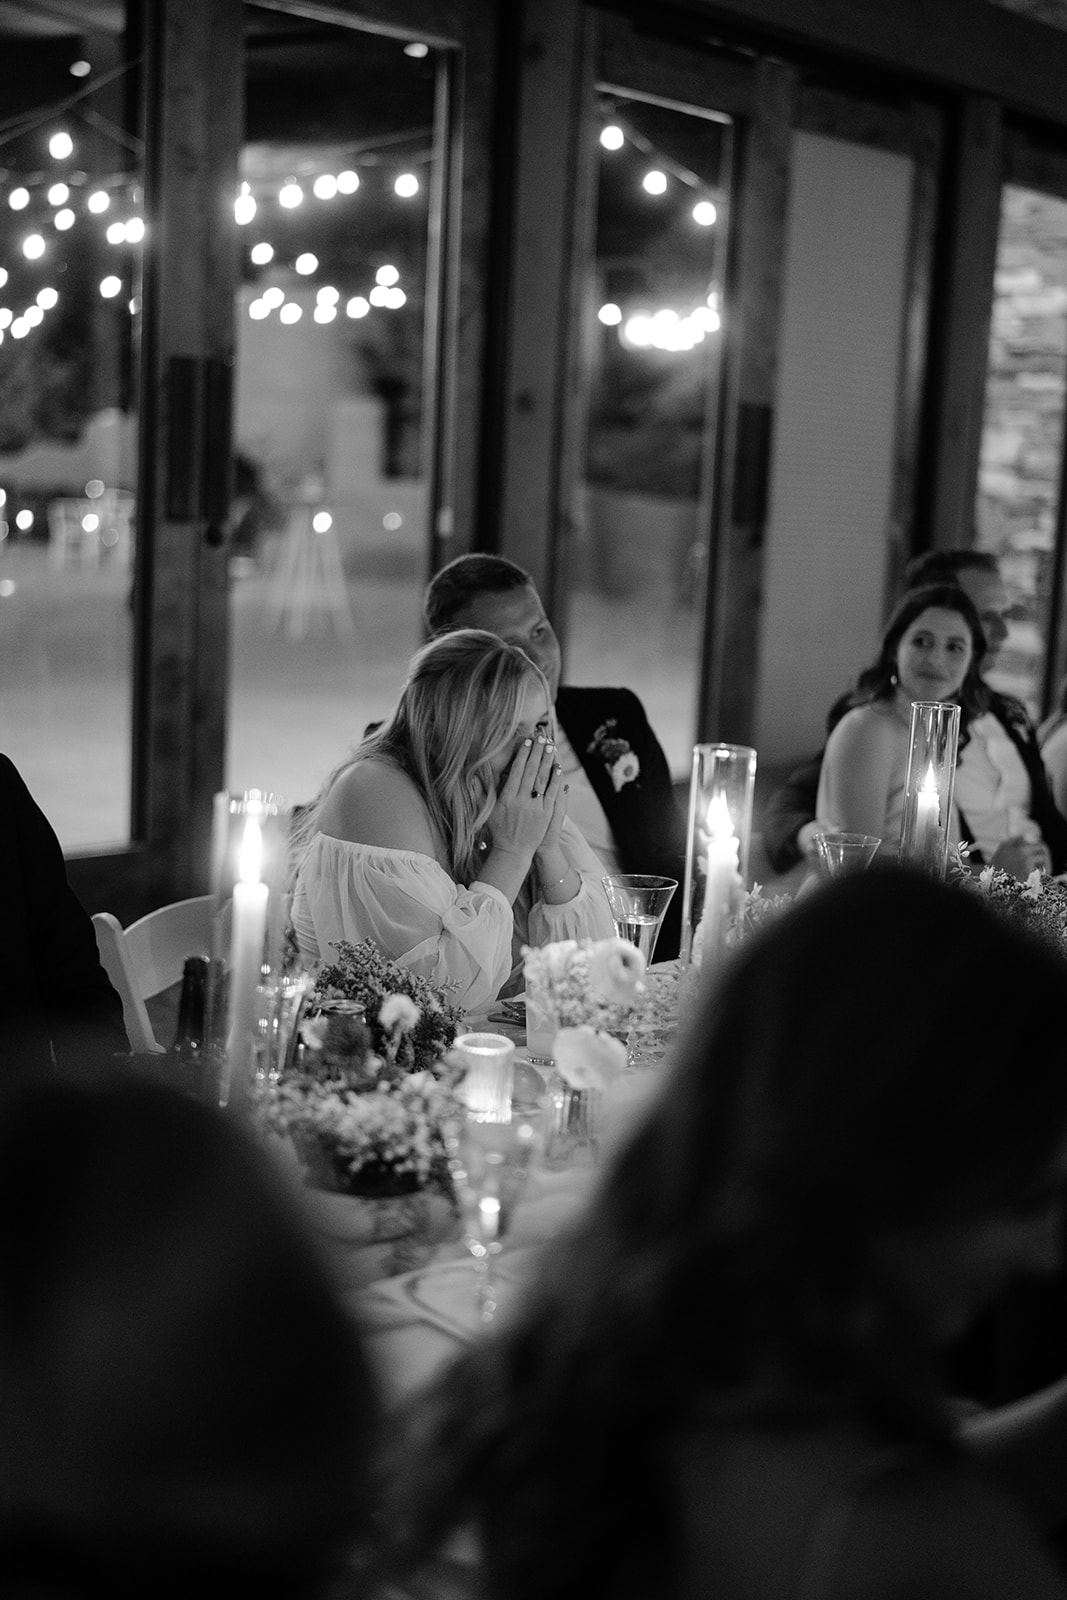 Bride covering her face laughing at table with her husband and twinkly lights in the background